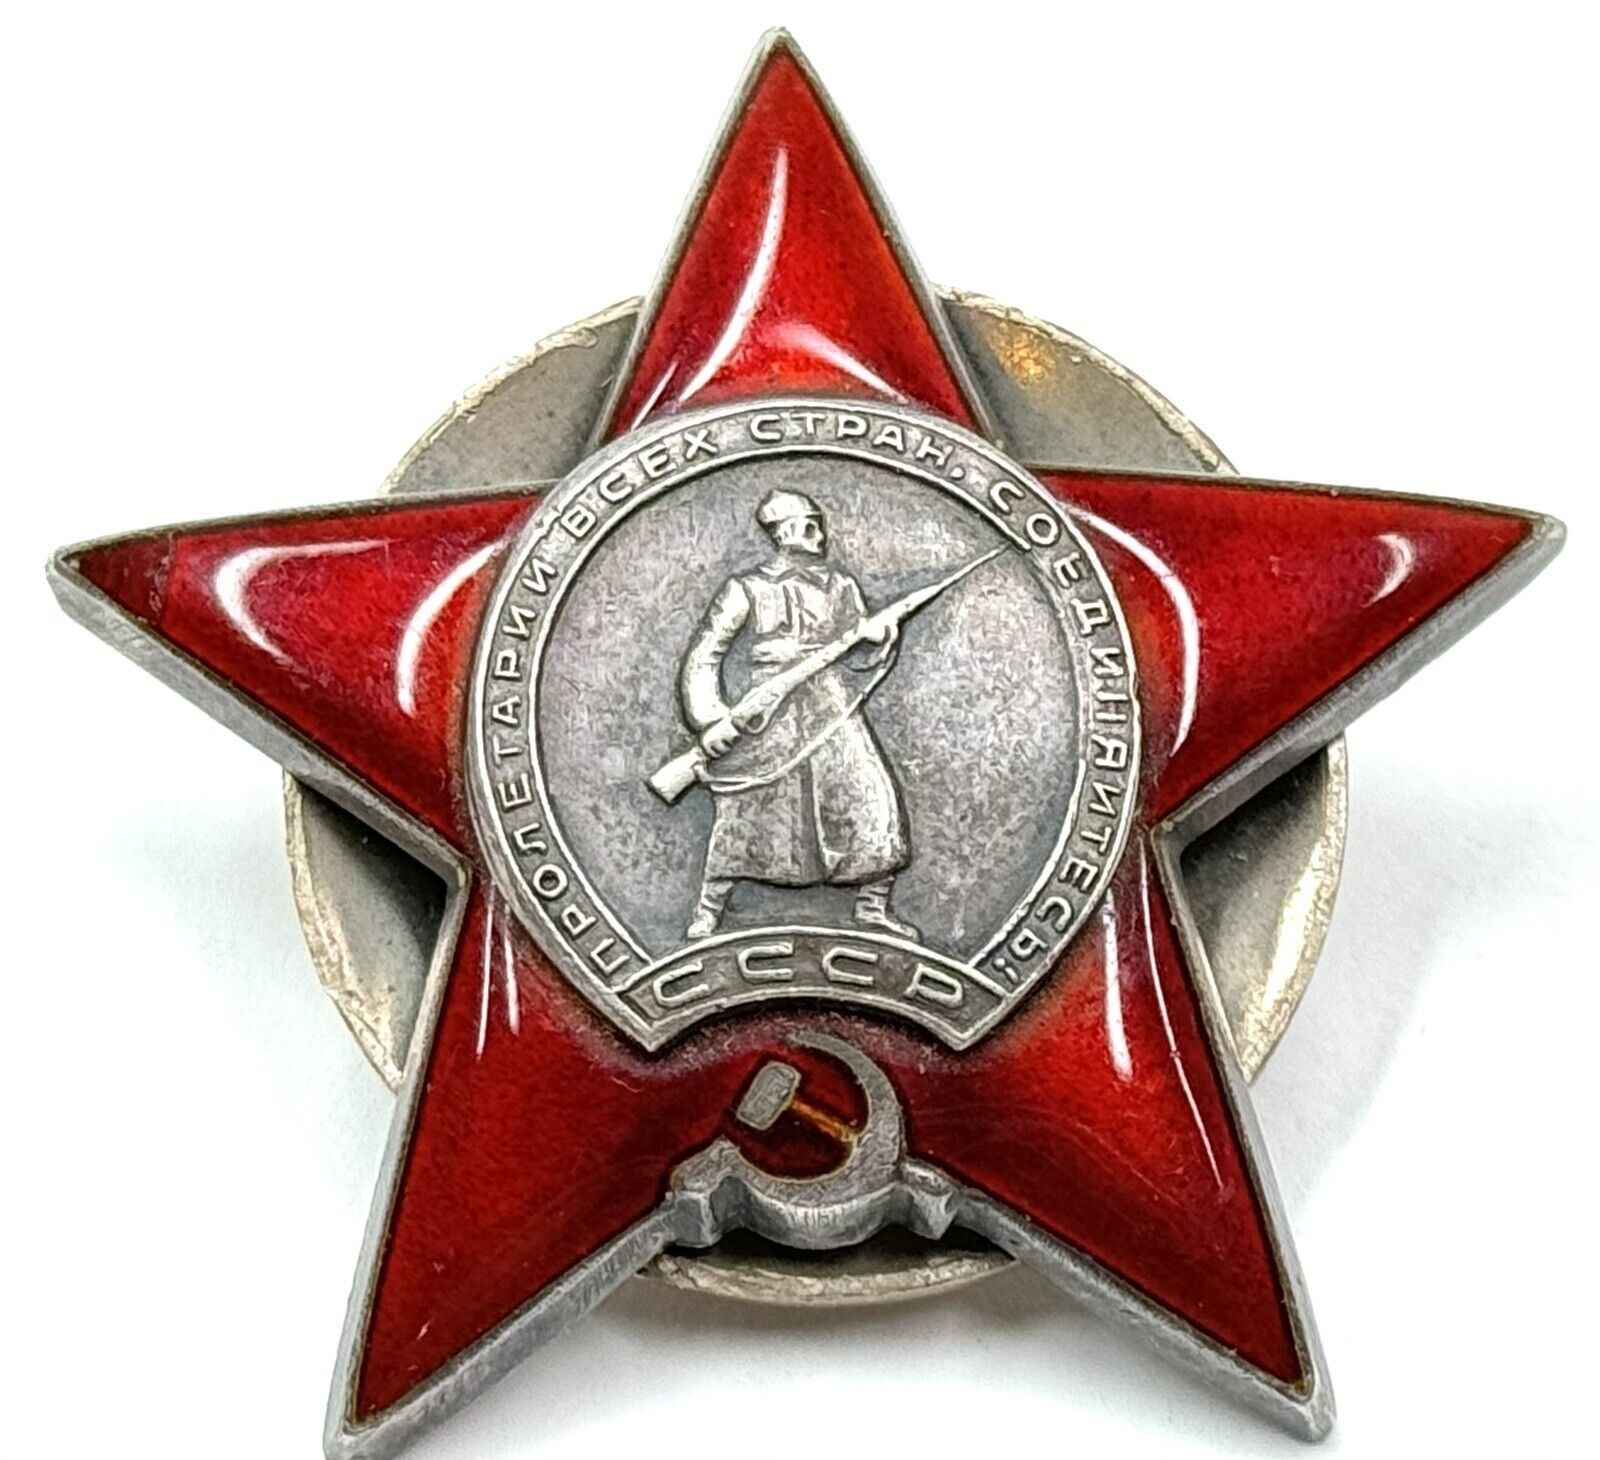 WWII Russian Soviet Union CCCP Silver Enamel Badge Medal Red Star Order #1804851